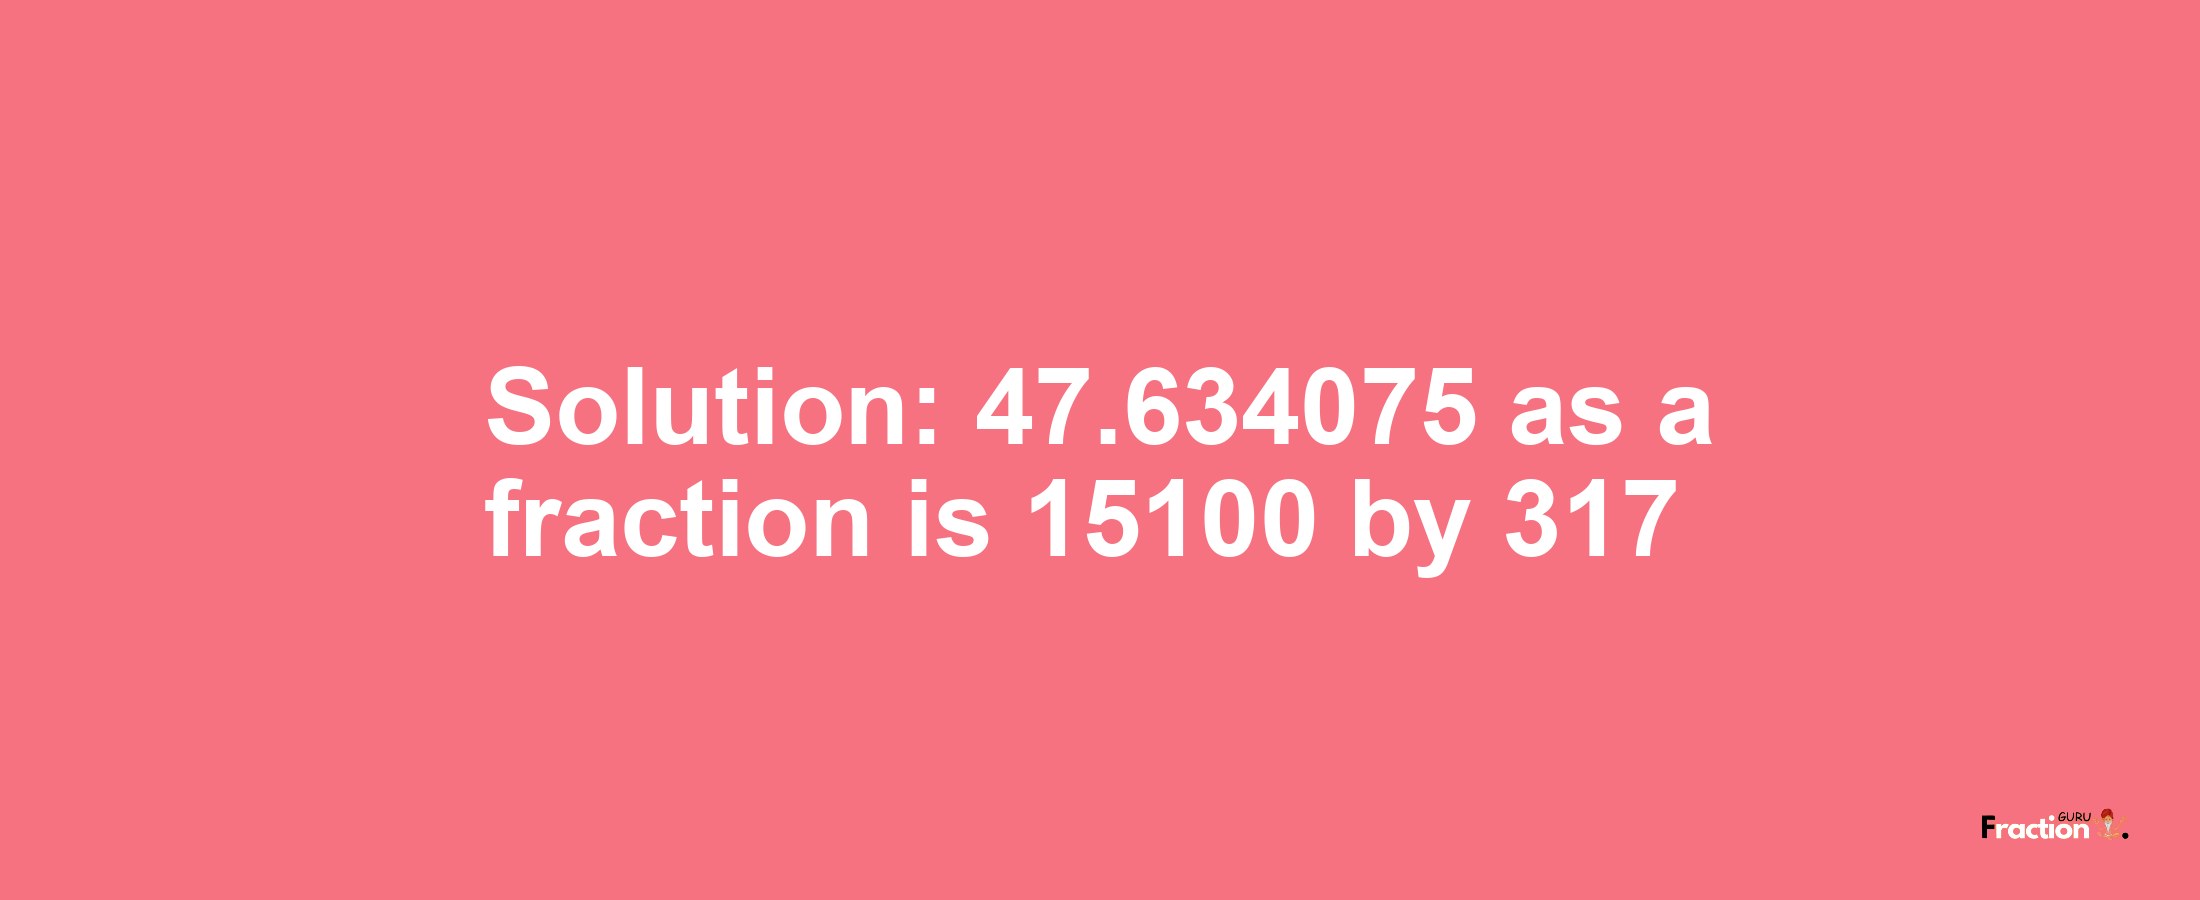 Solution:47.634075 as a fraction is 15100/317